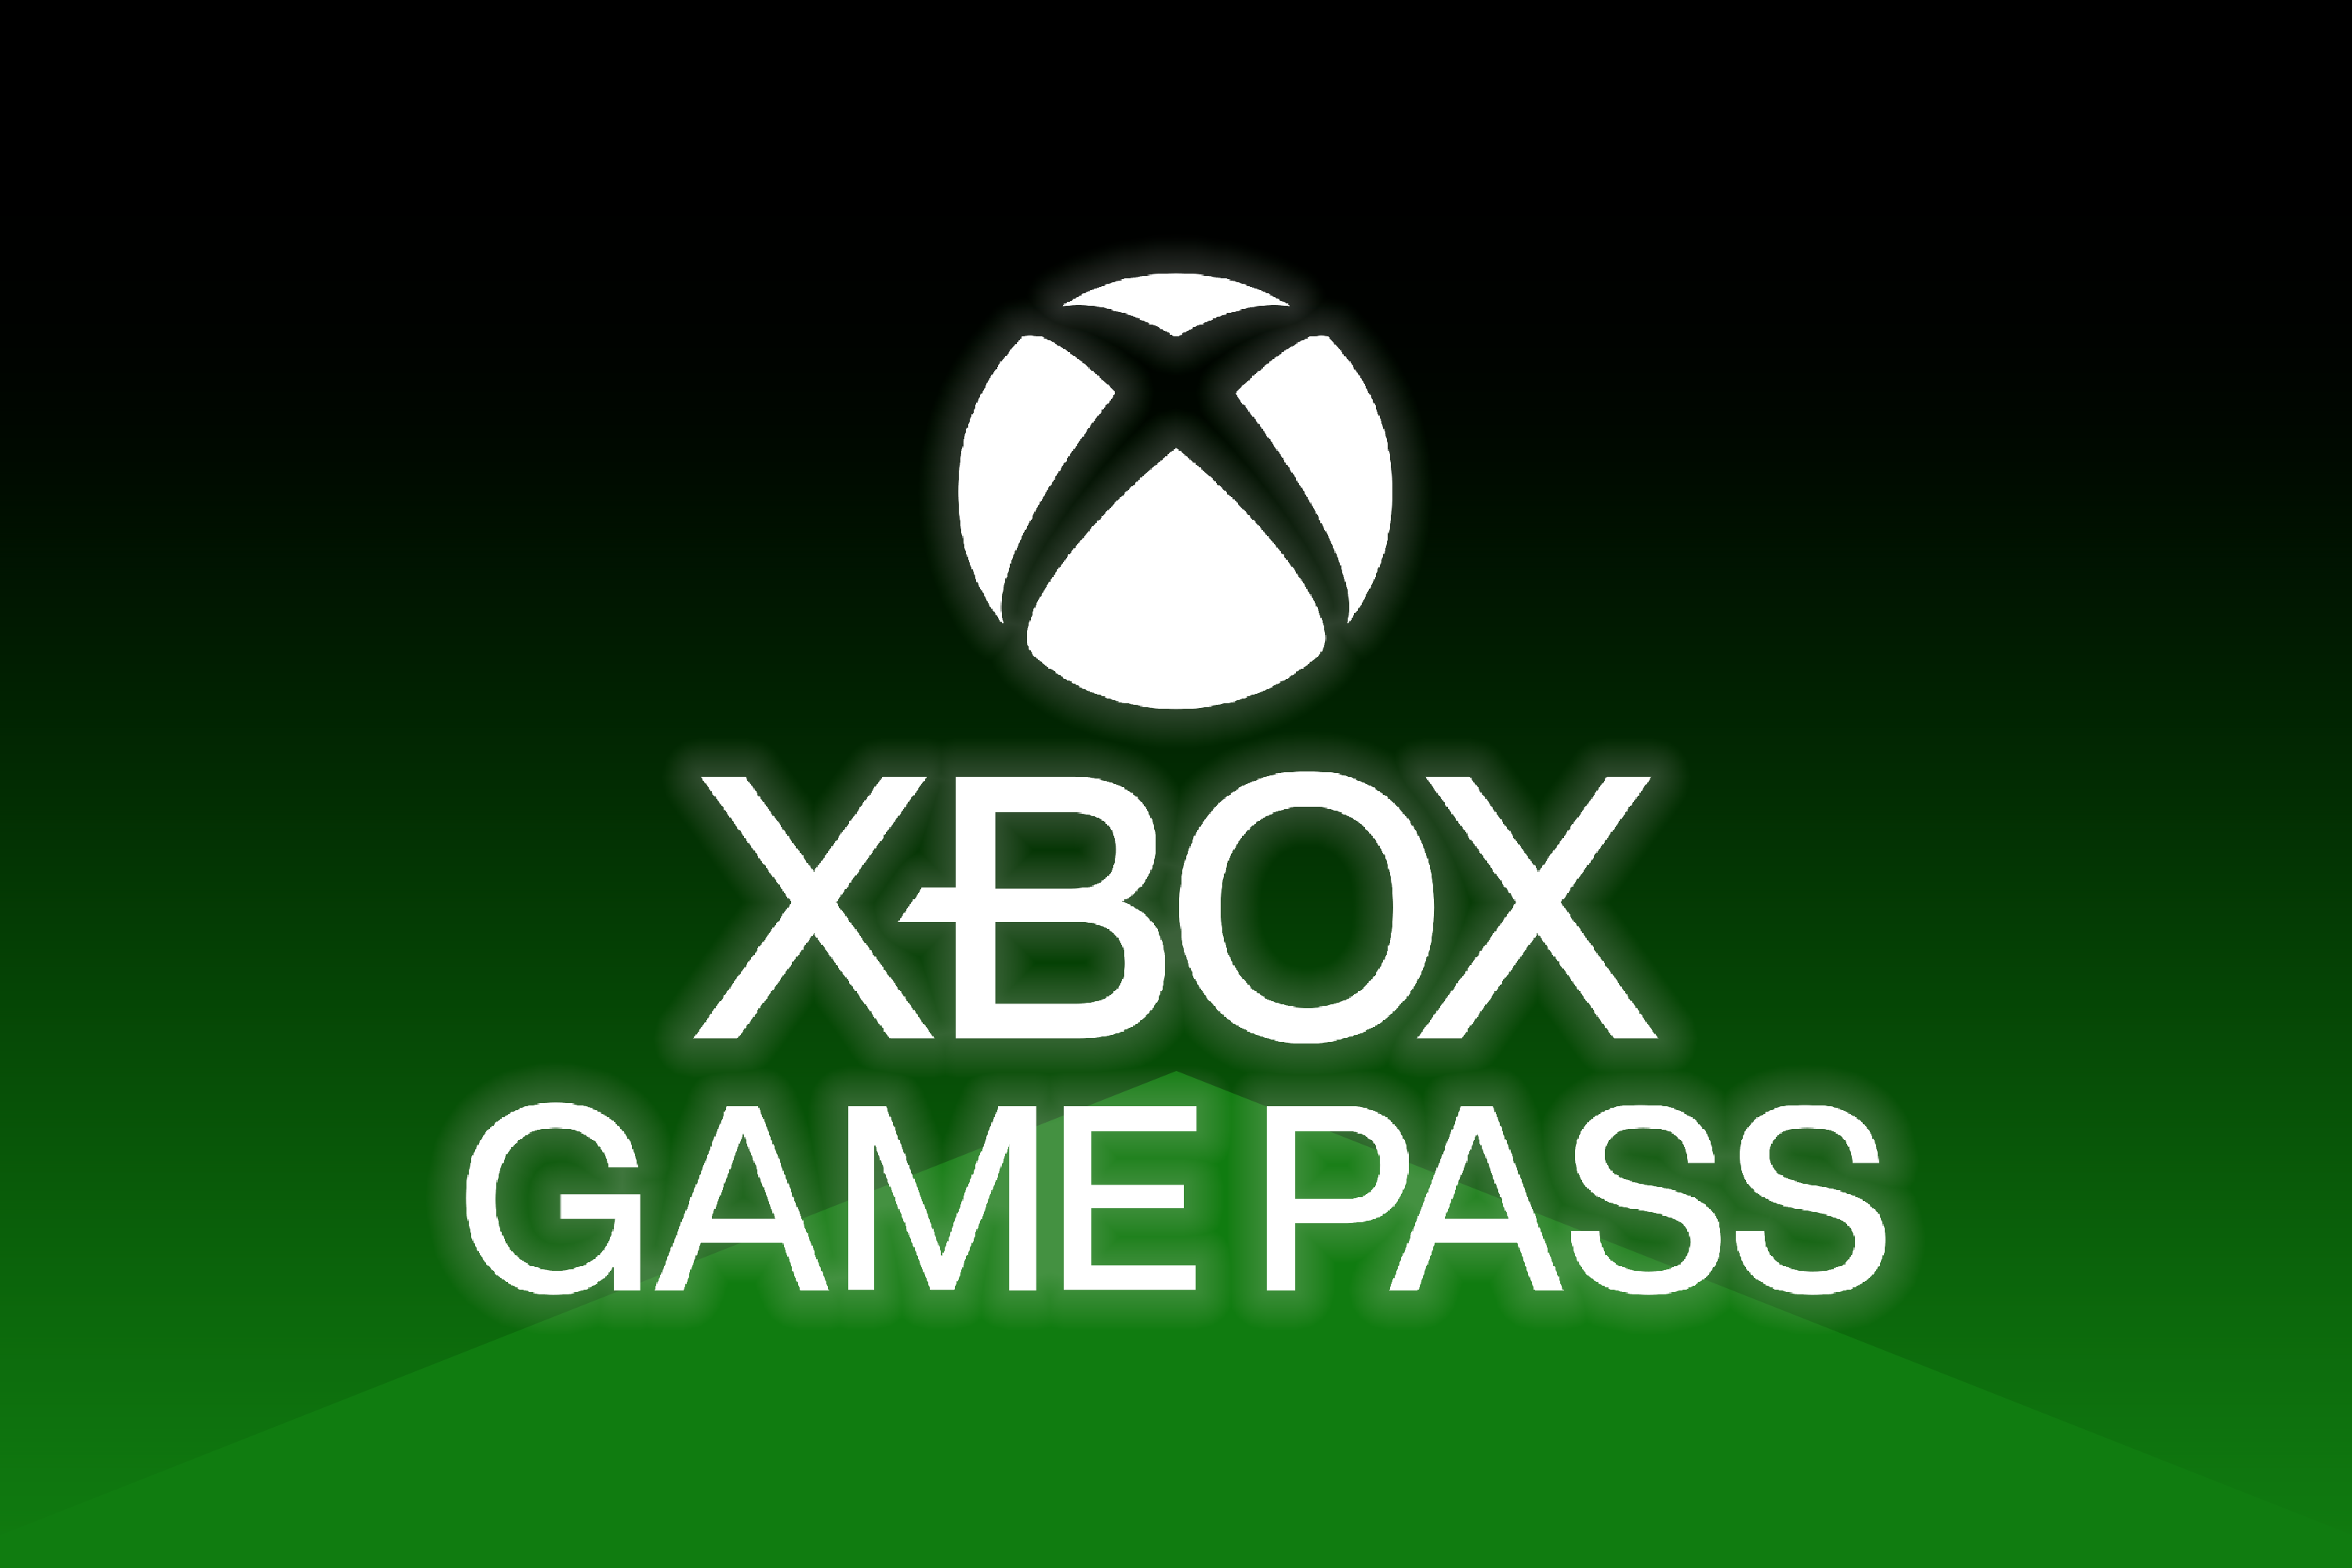 Xbox Game Pass Vs. PlayStation Plus: Which Gaming Service Is Best?